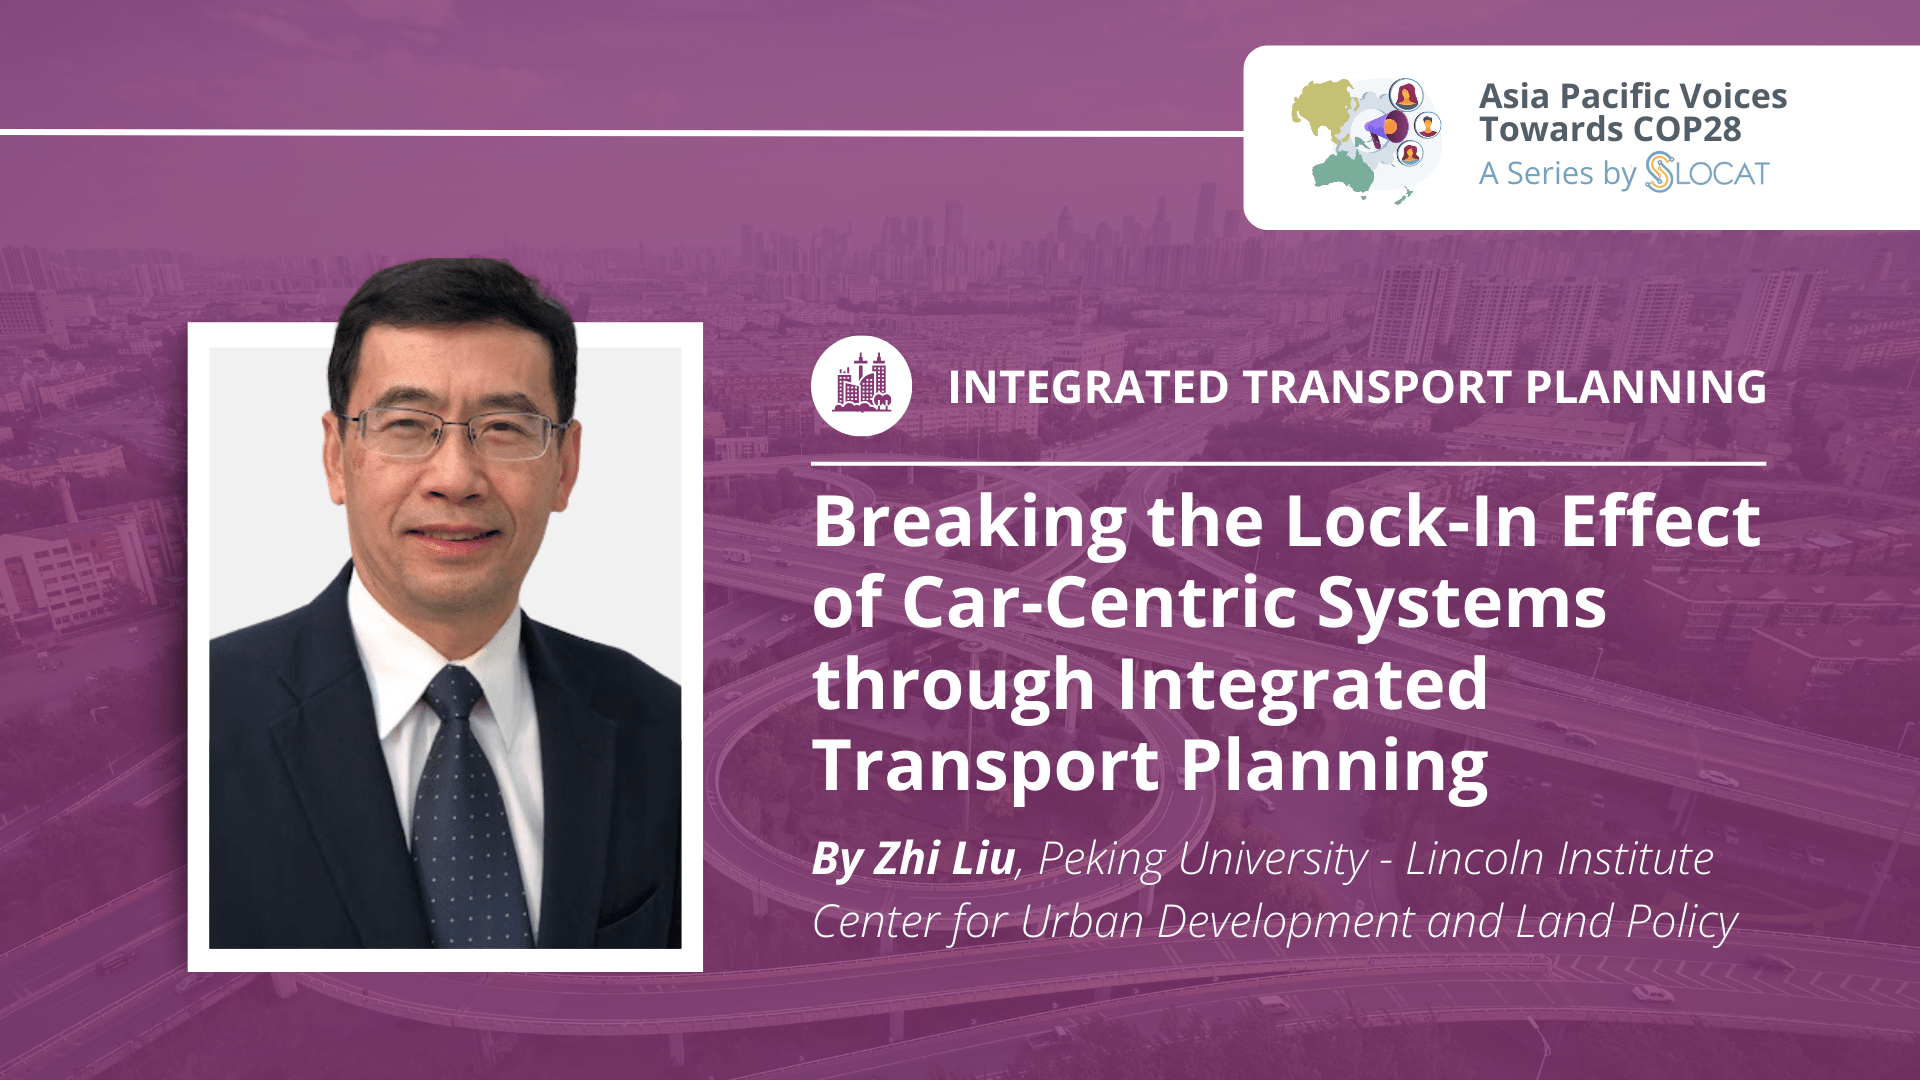 Breaking the Lock-In Effect of Car-Centric Systems through Integrated Transport Planning